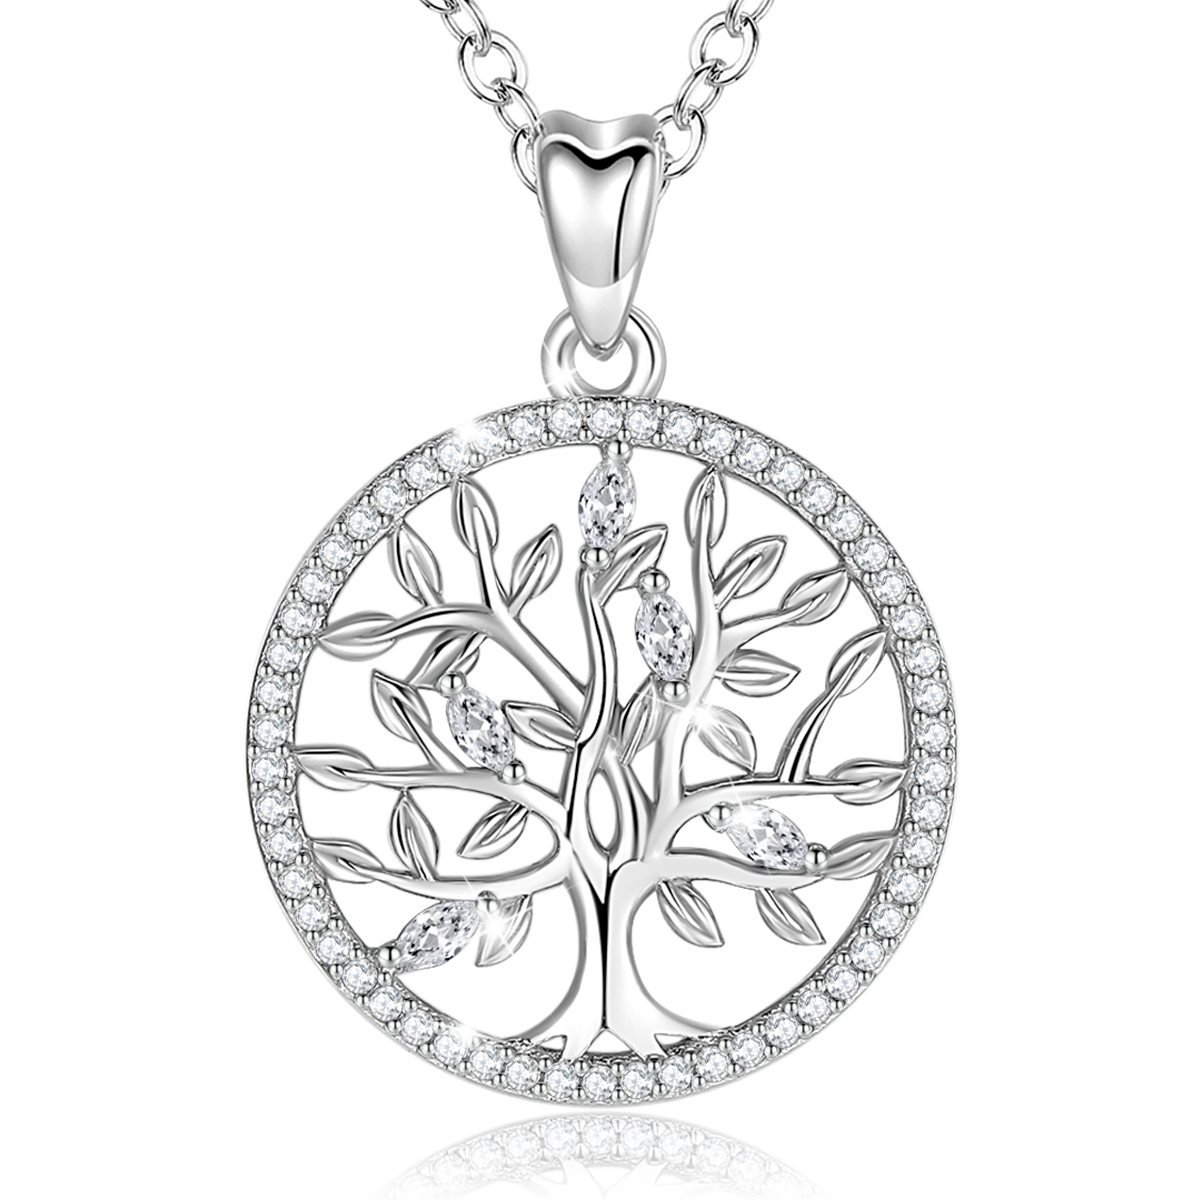 Merryshine Jewelry S925 Sterling Silver Tree of Life Necklace with Cubic Zirconia